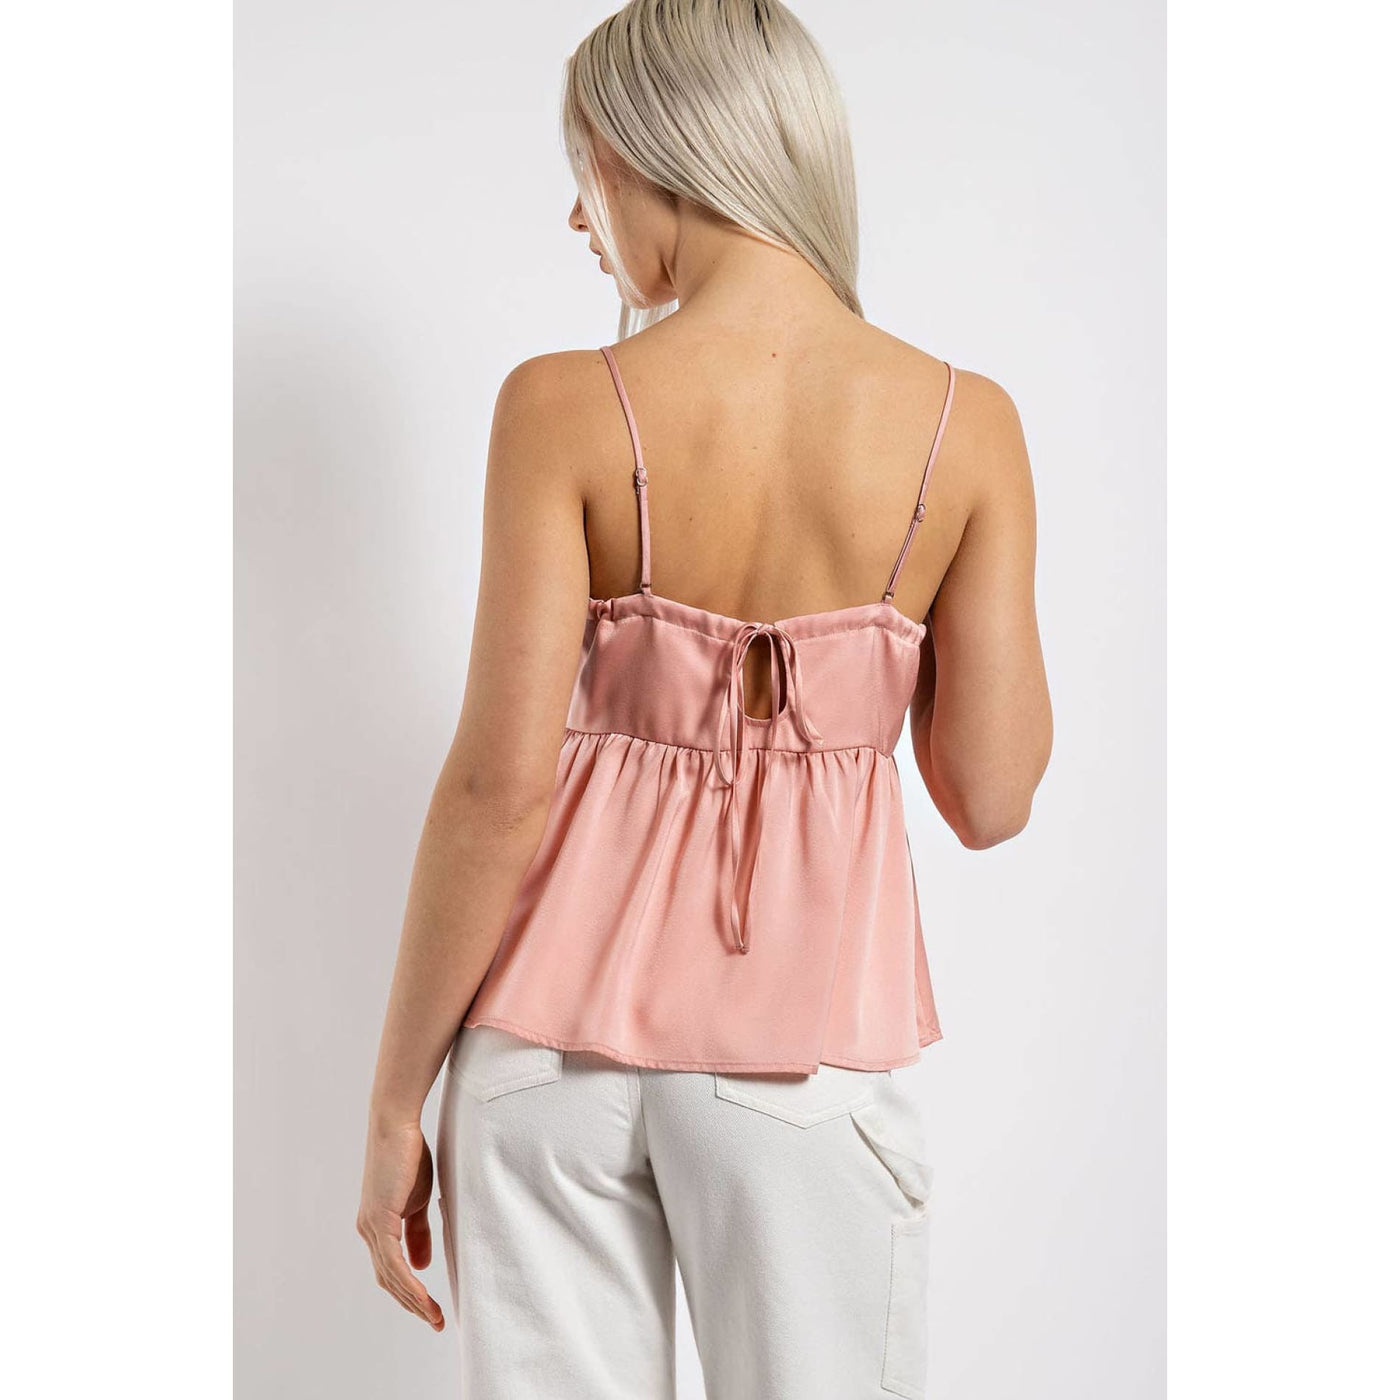 Falling To Pieces Top - 100 Short/Sleeveless Tops